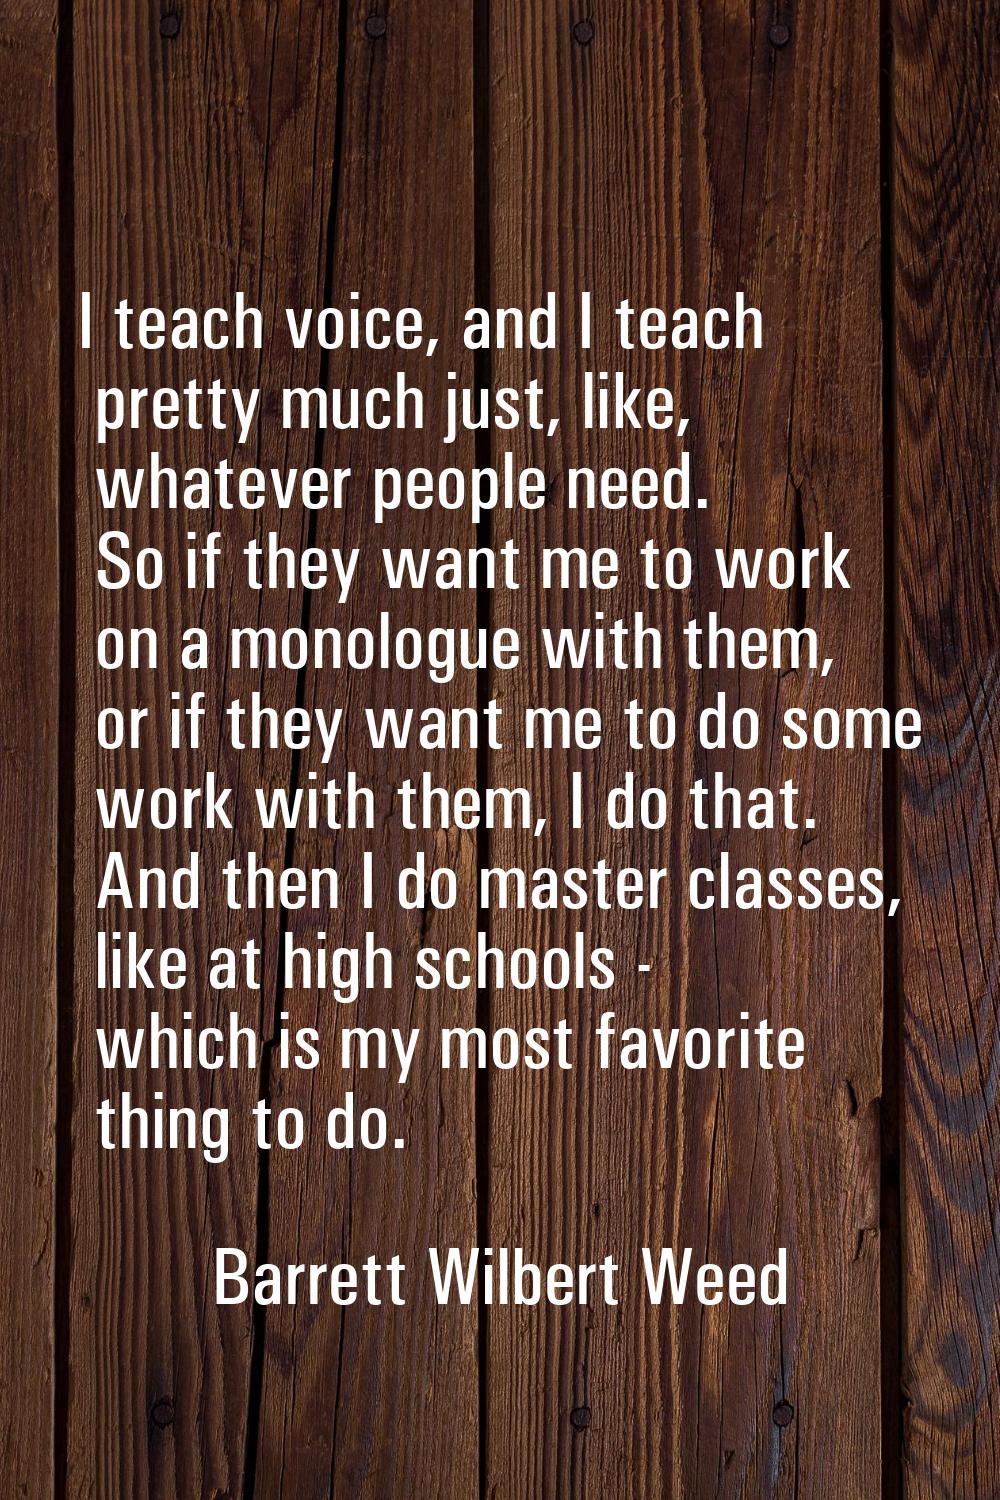 I teach voice, and I teach pretty much just, like, whatever people need. So if they want me to work